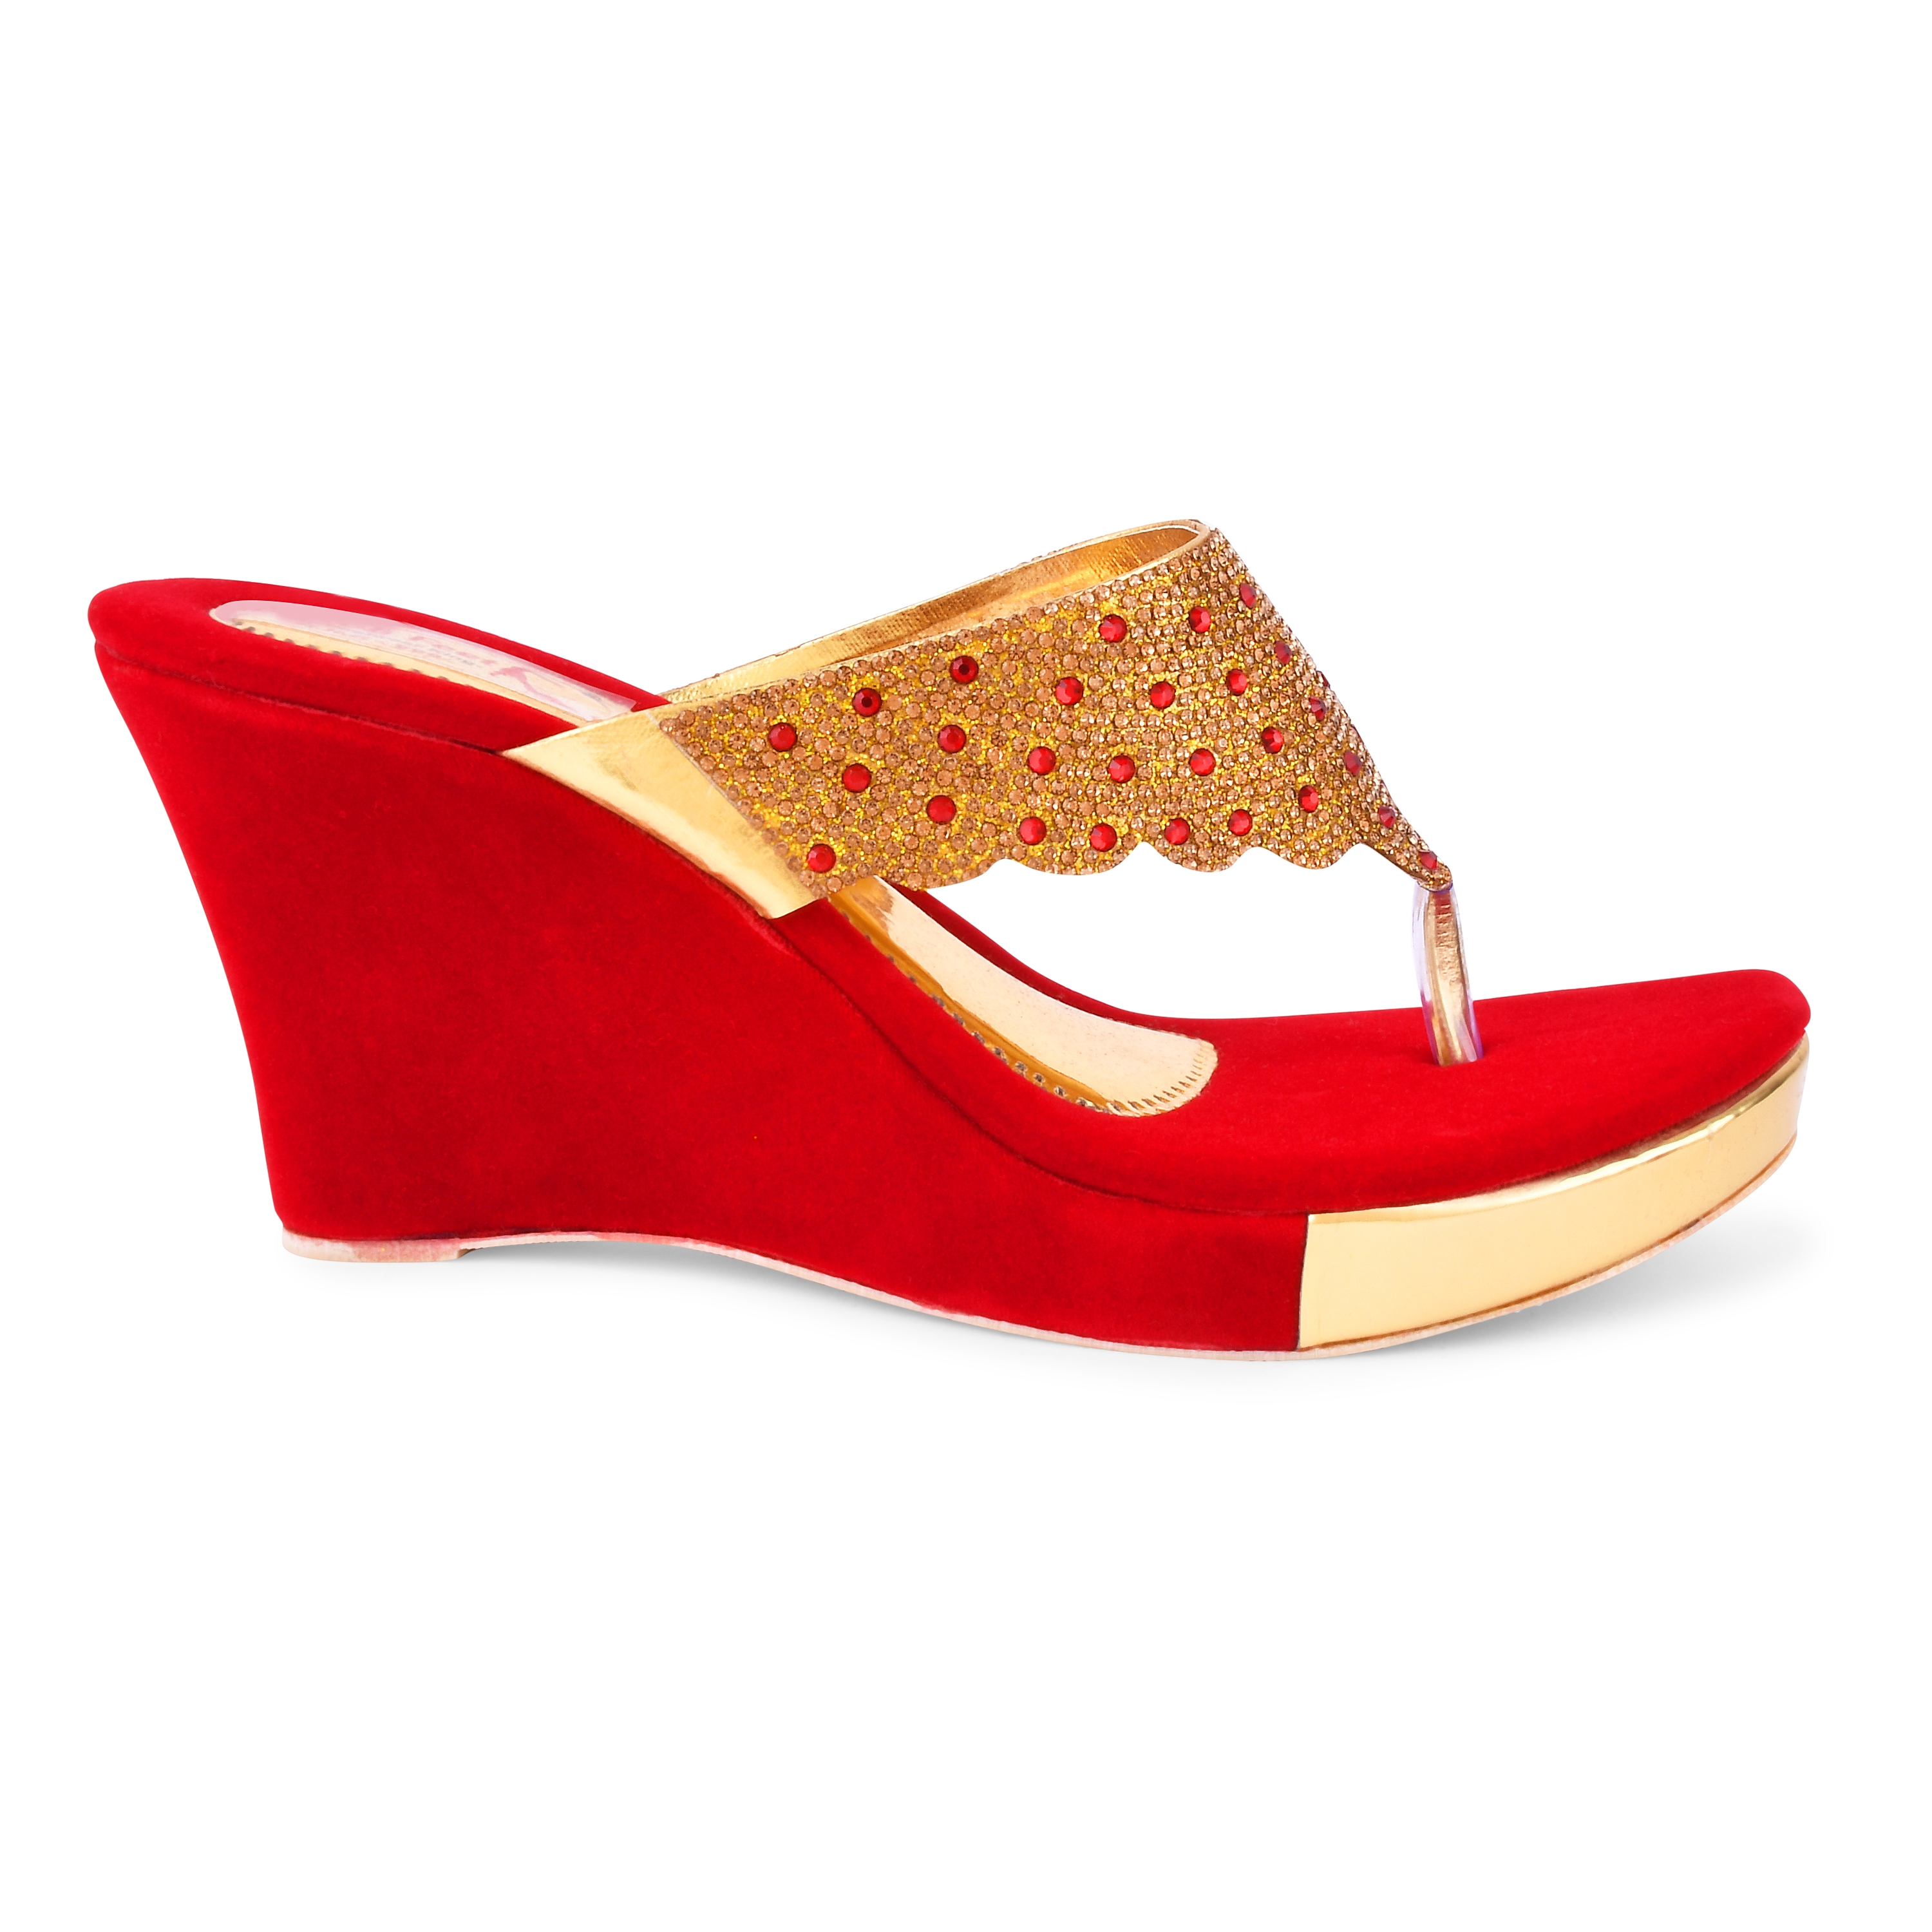 On-Trend Wedges for Women With Style